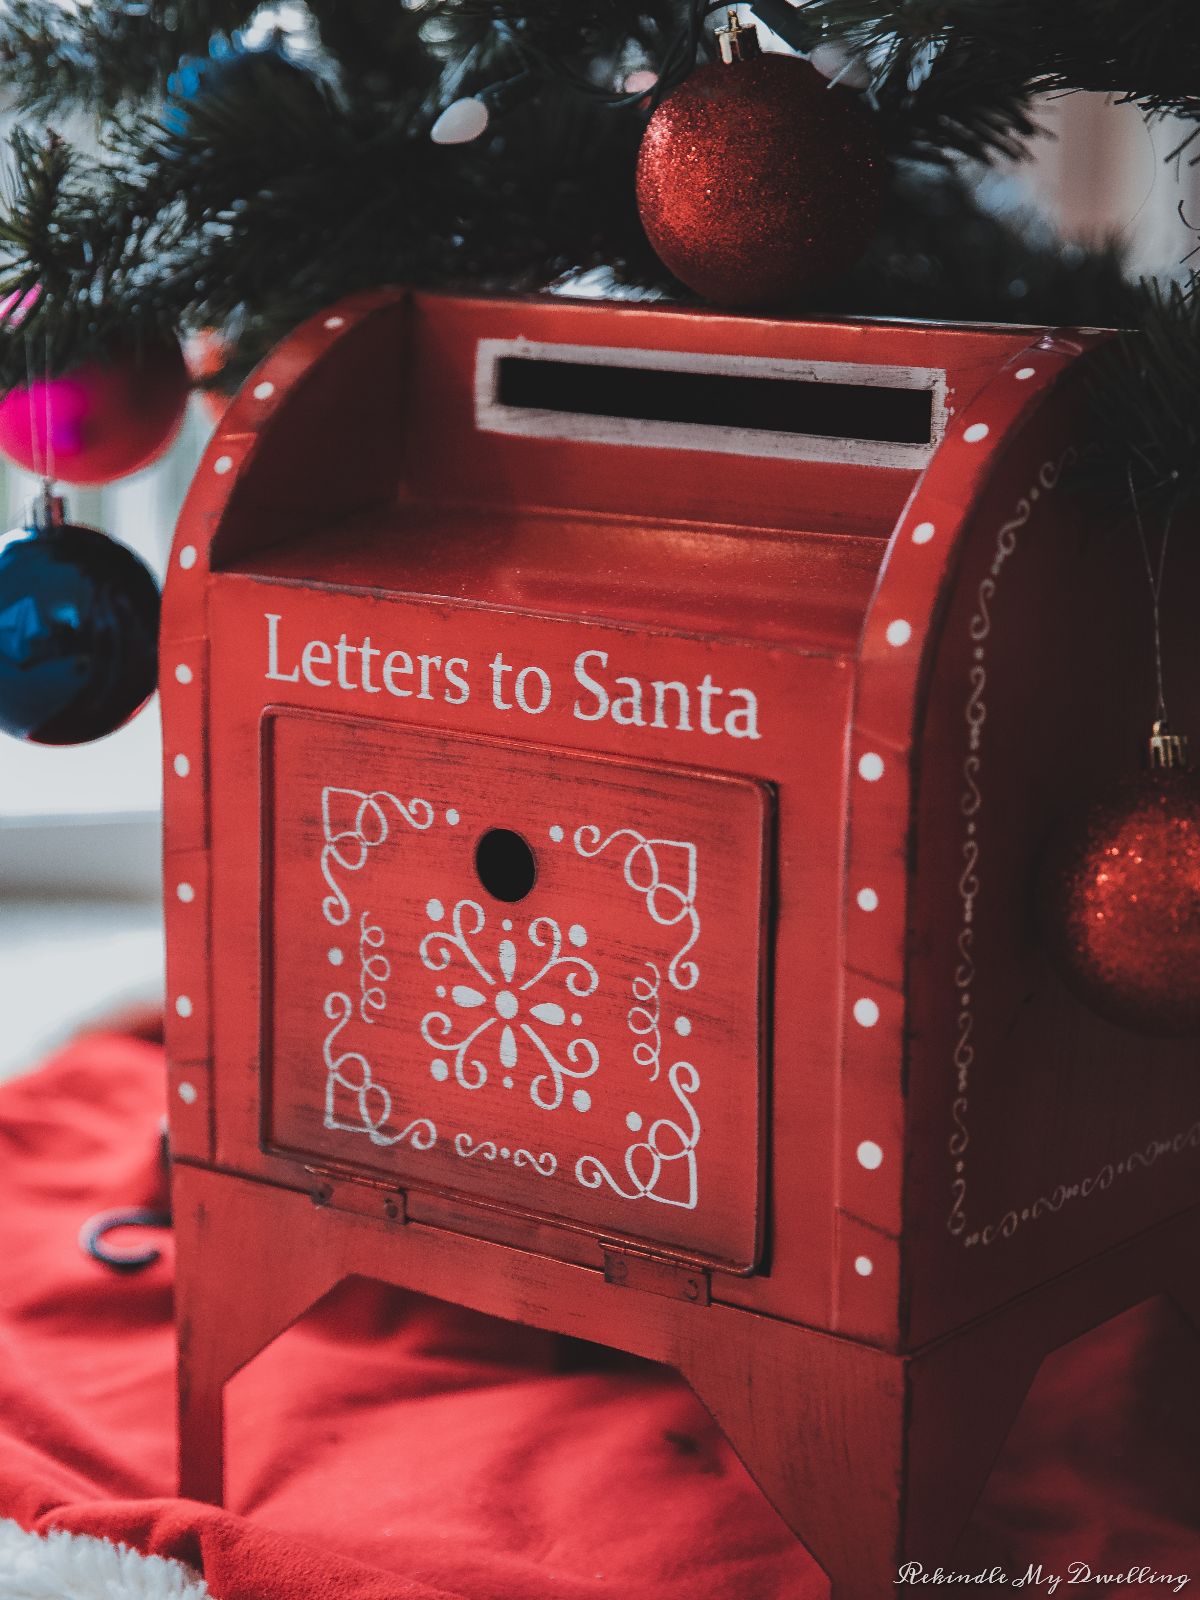 Mail box with "letters to Santa" written on the front.